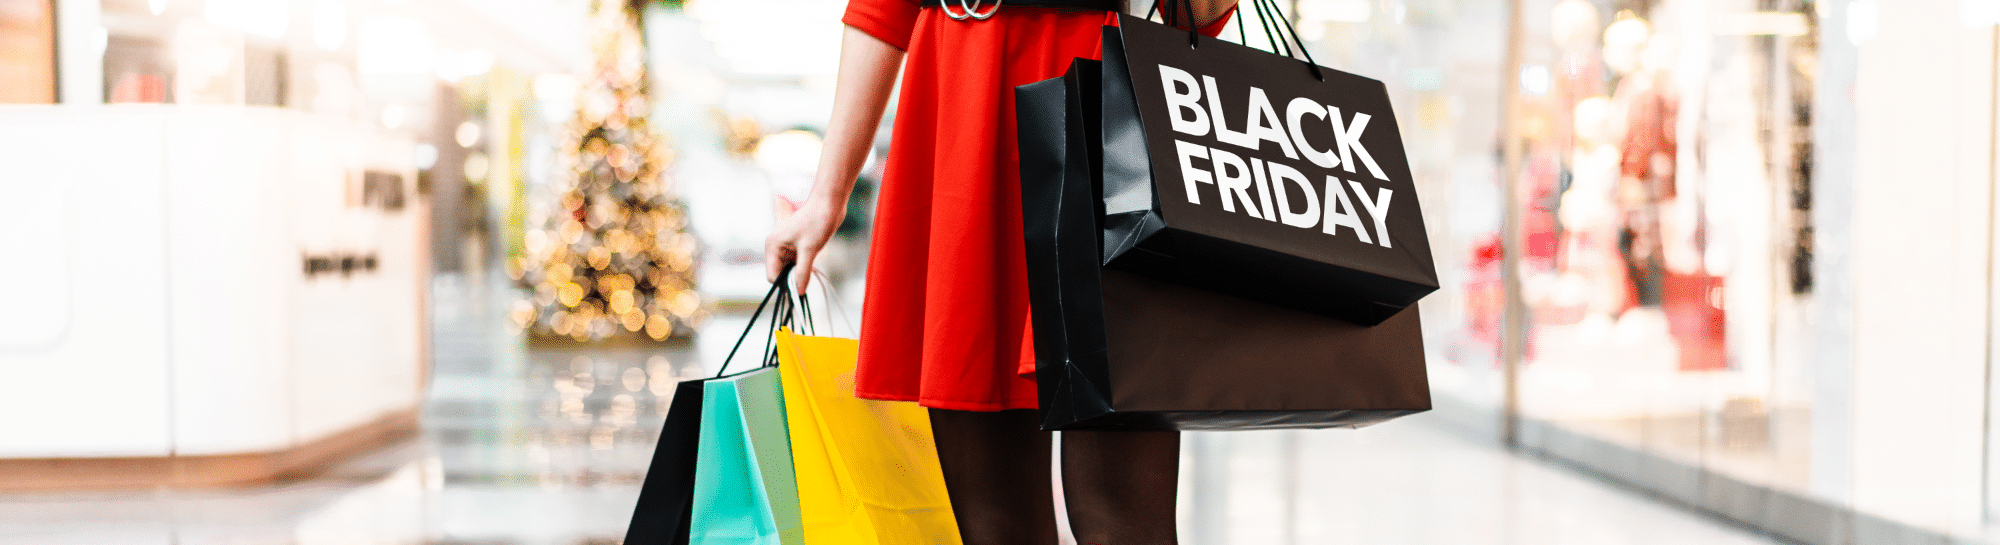 Black Friday Ecommerce Guide: 30 Tips for Marketing, Conversions, and Shipping